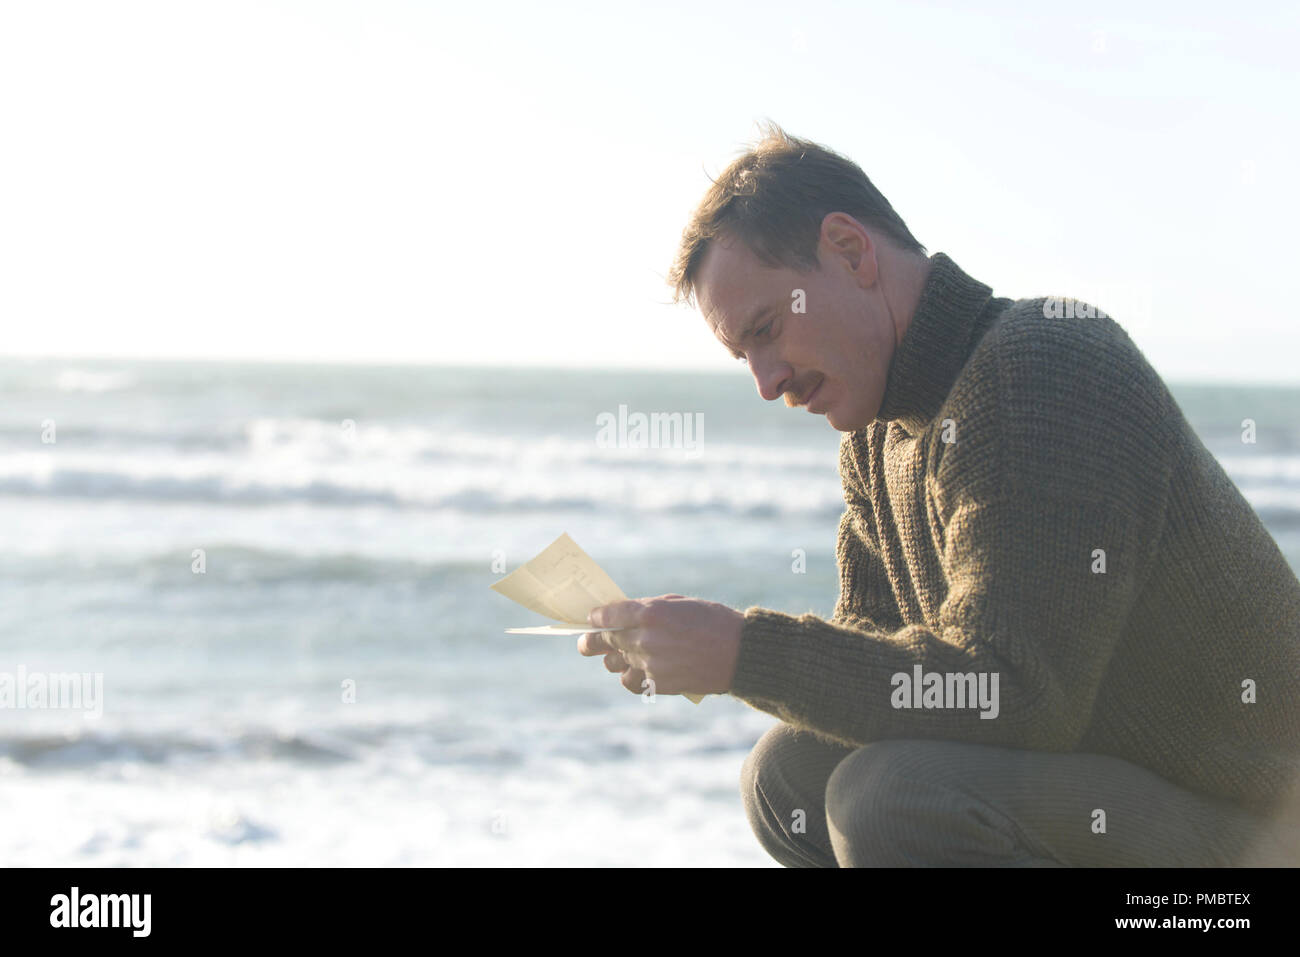 Michael Fassbender stars as Tom Sherbourne in DreamWorks Pictures' poignant drama THE LIGHT BETWEEN OCEANS, written and directed by Derek Cianfrance based on the acclaimed novel by M.L. Stedman. Stock Photo